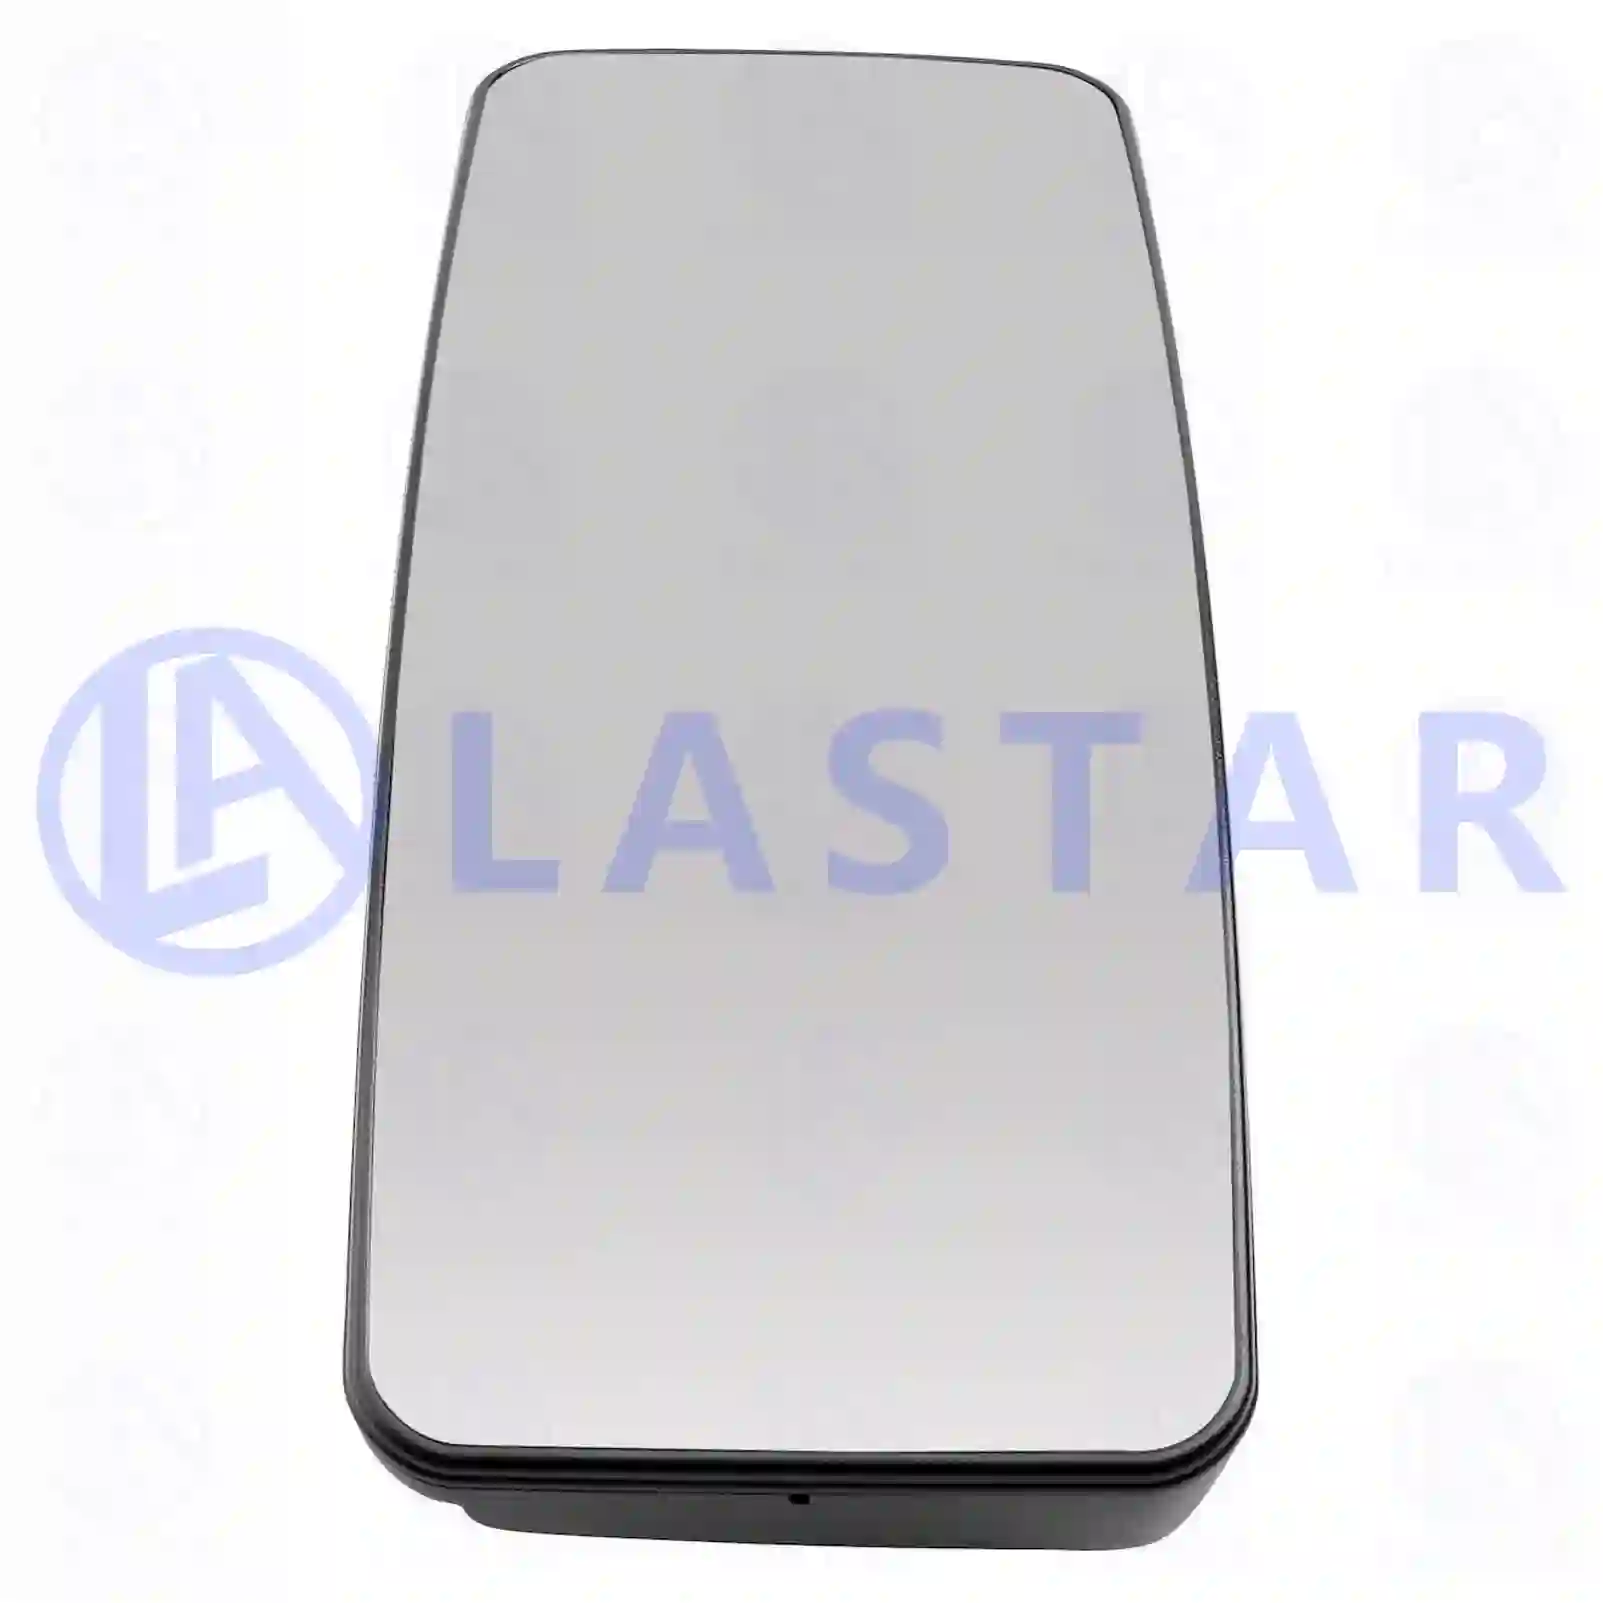 Main mirror, heated, electrical, 77719002, 0018109116, ZG60952-0008 ||  77719002 Lastar Spare Part | Truck Spare Parts, Auotomotive Spare Parts Main mirror, heated, electrical, 77719002, 0018109116, ZG60952-0008 ||  77719002 Lastar Spare Part | Truck Spare Parts, Auotomotive Spare Parts